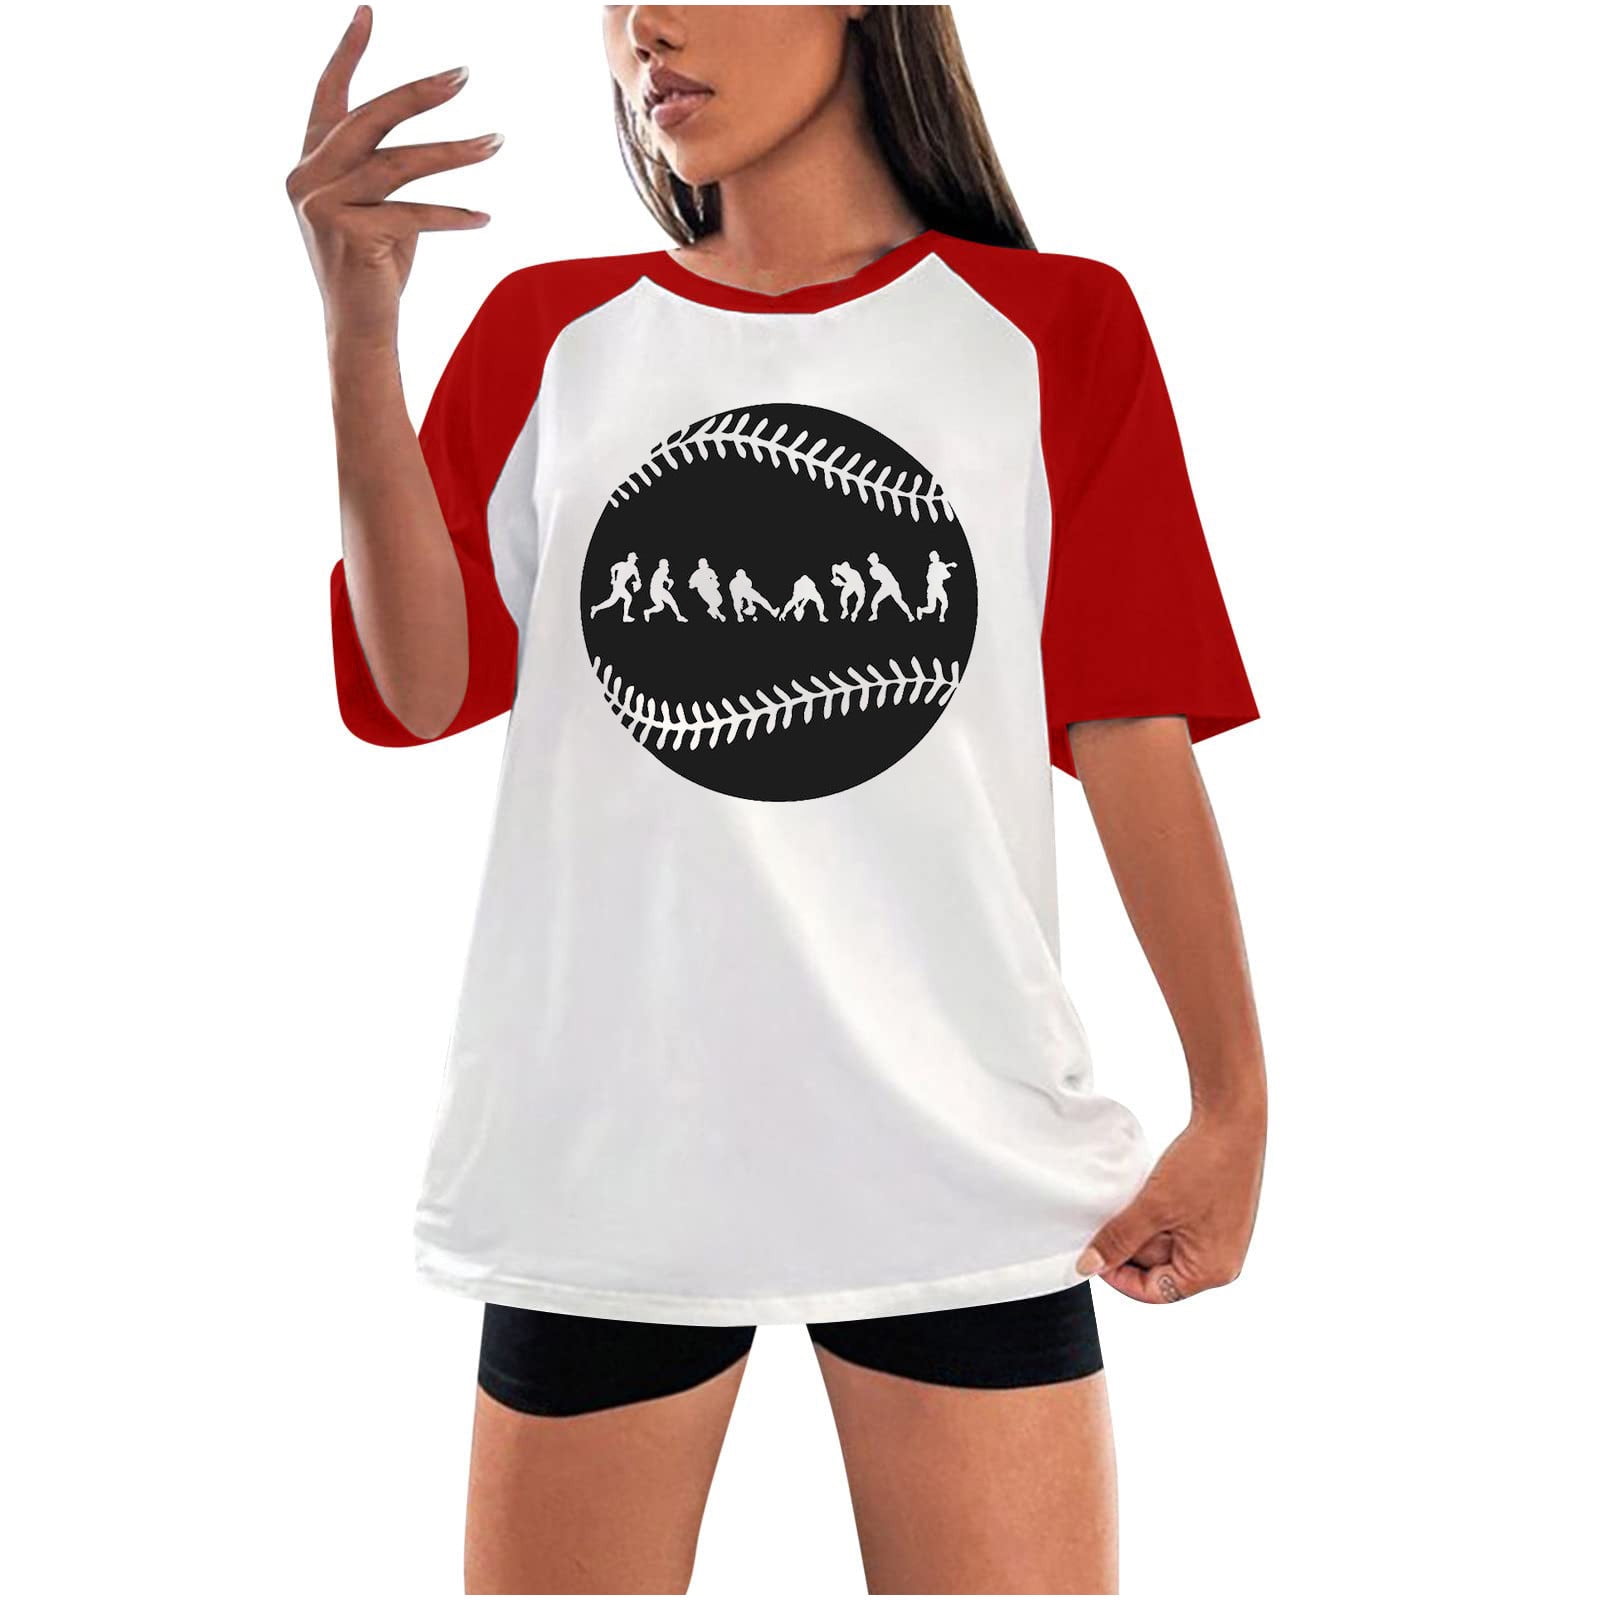 Shop4Ever Men's Canada Red with Leaf Canadian Flag Raglan Baseball Shirt  Small White/Black 